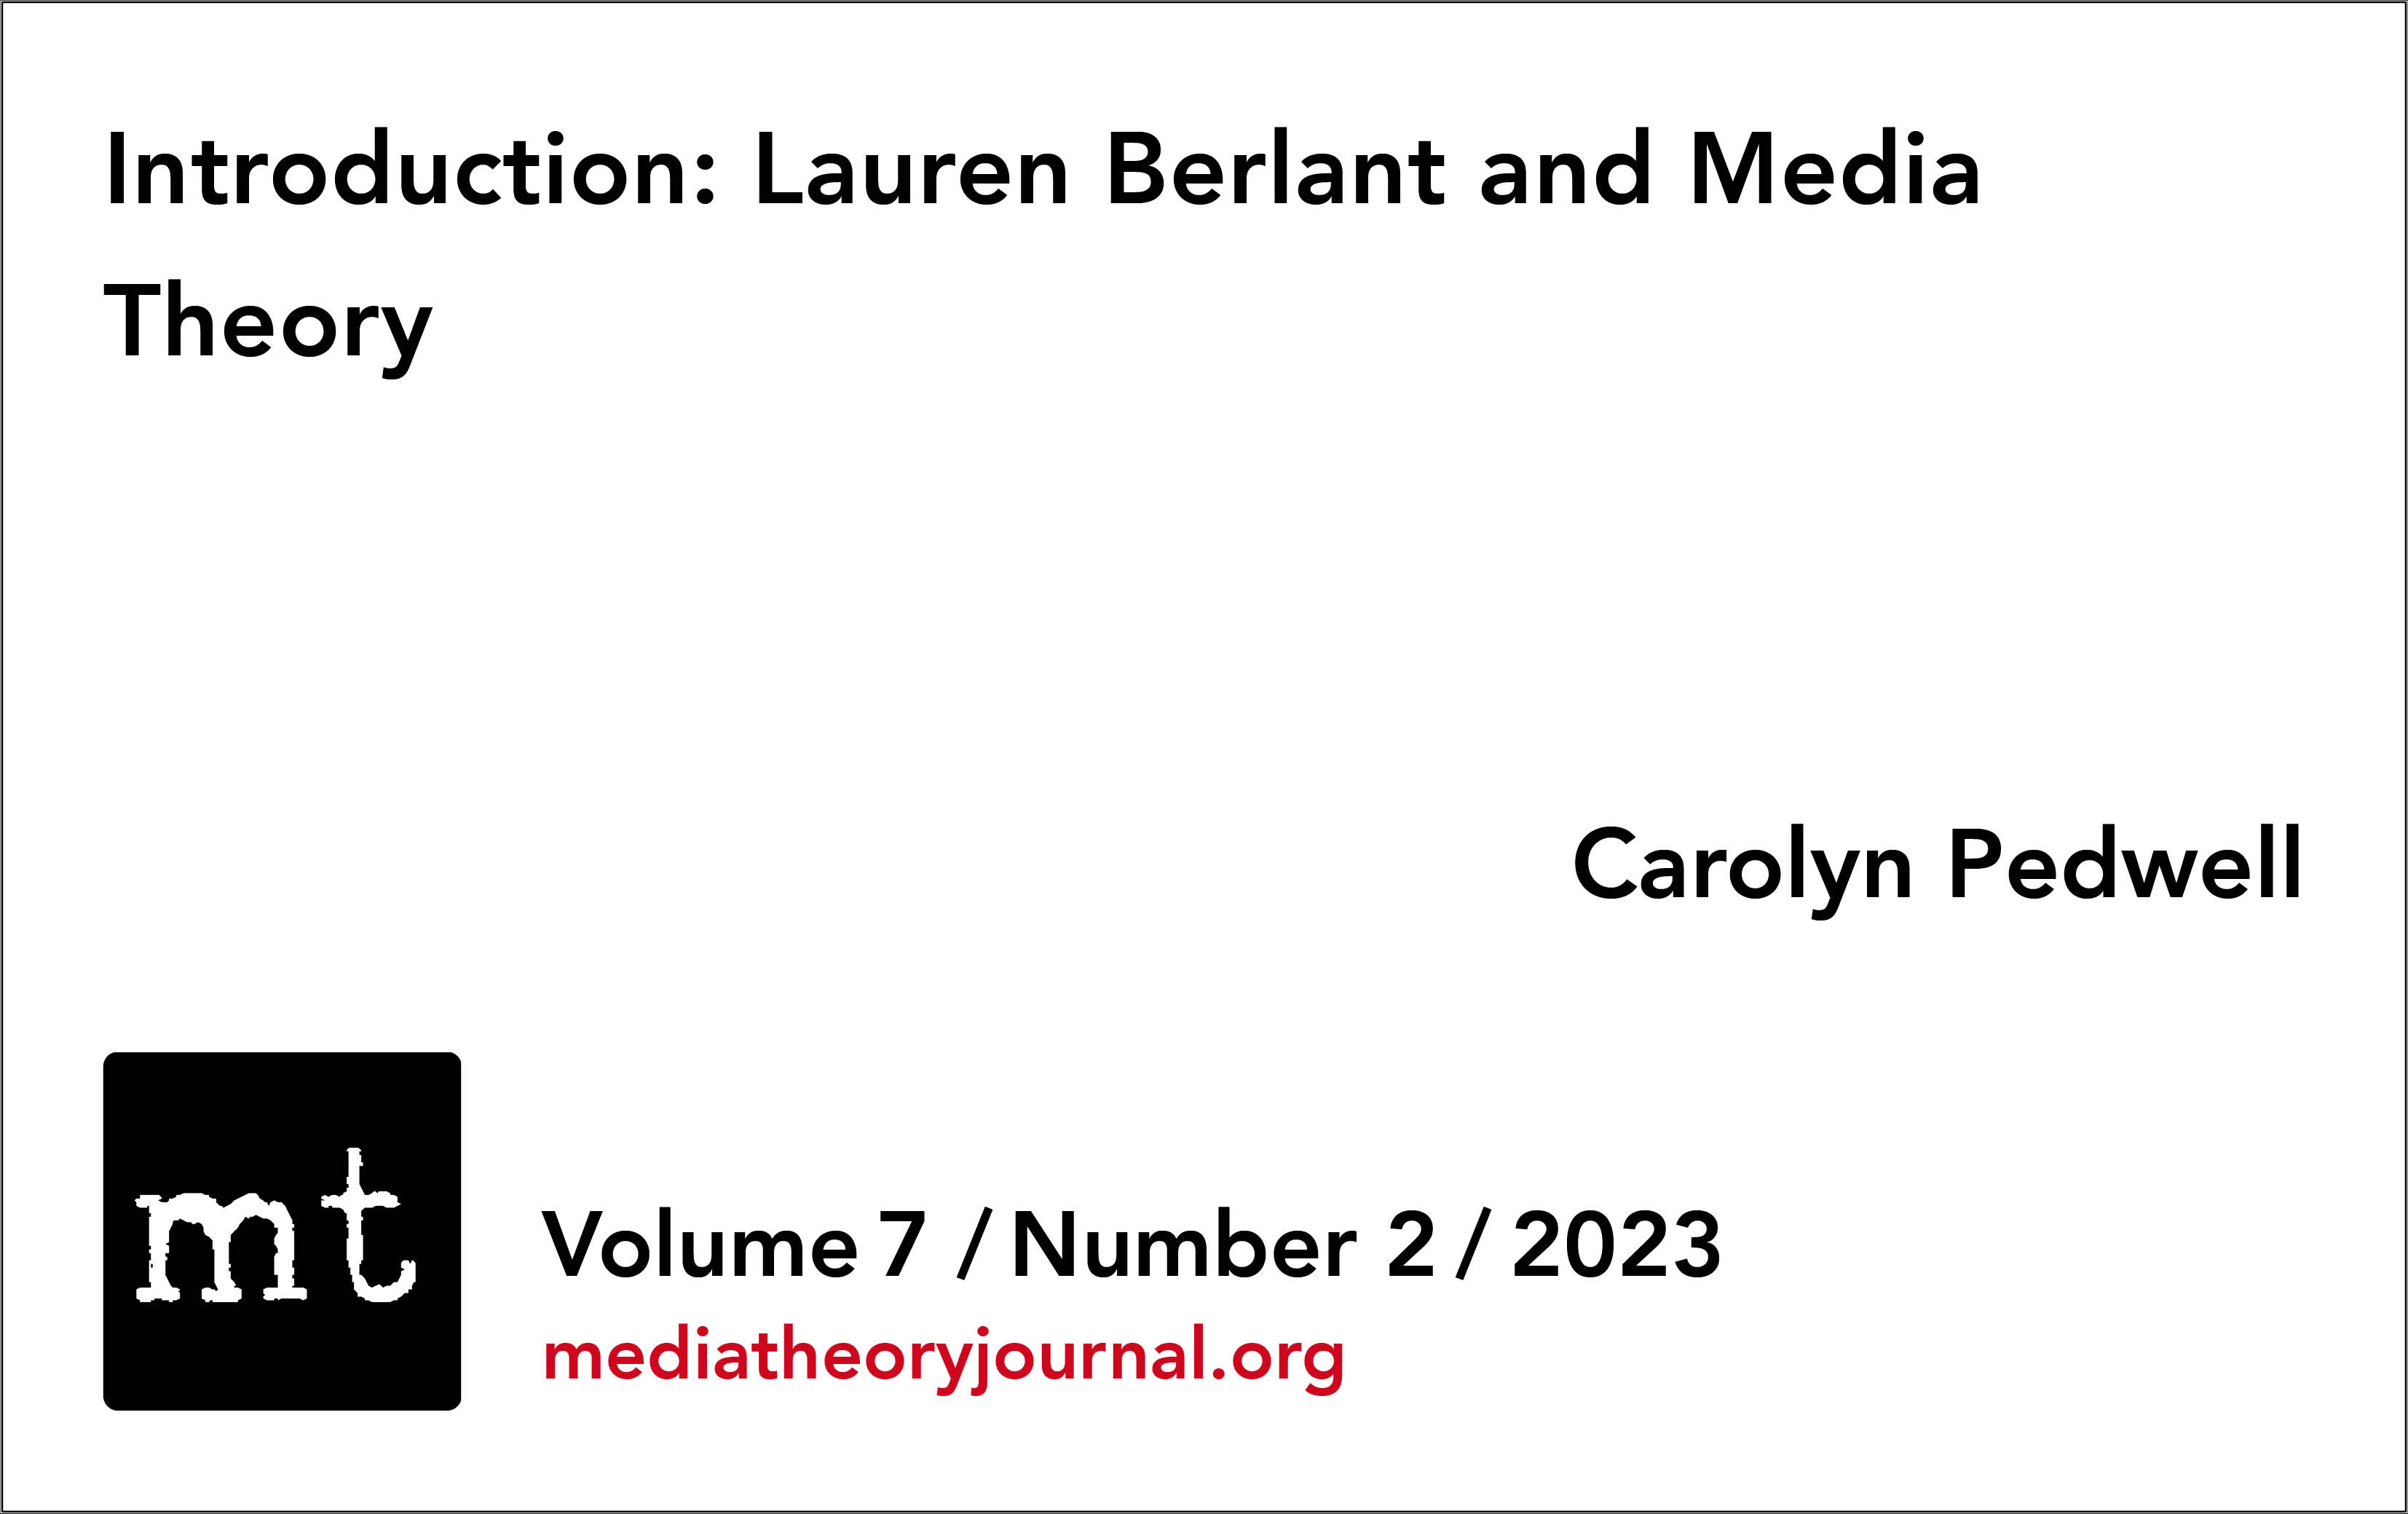 Carolyn Pedwell:  Introduction: Lauren Berlant and Media Theory